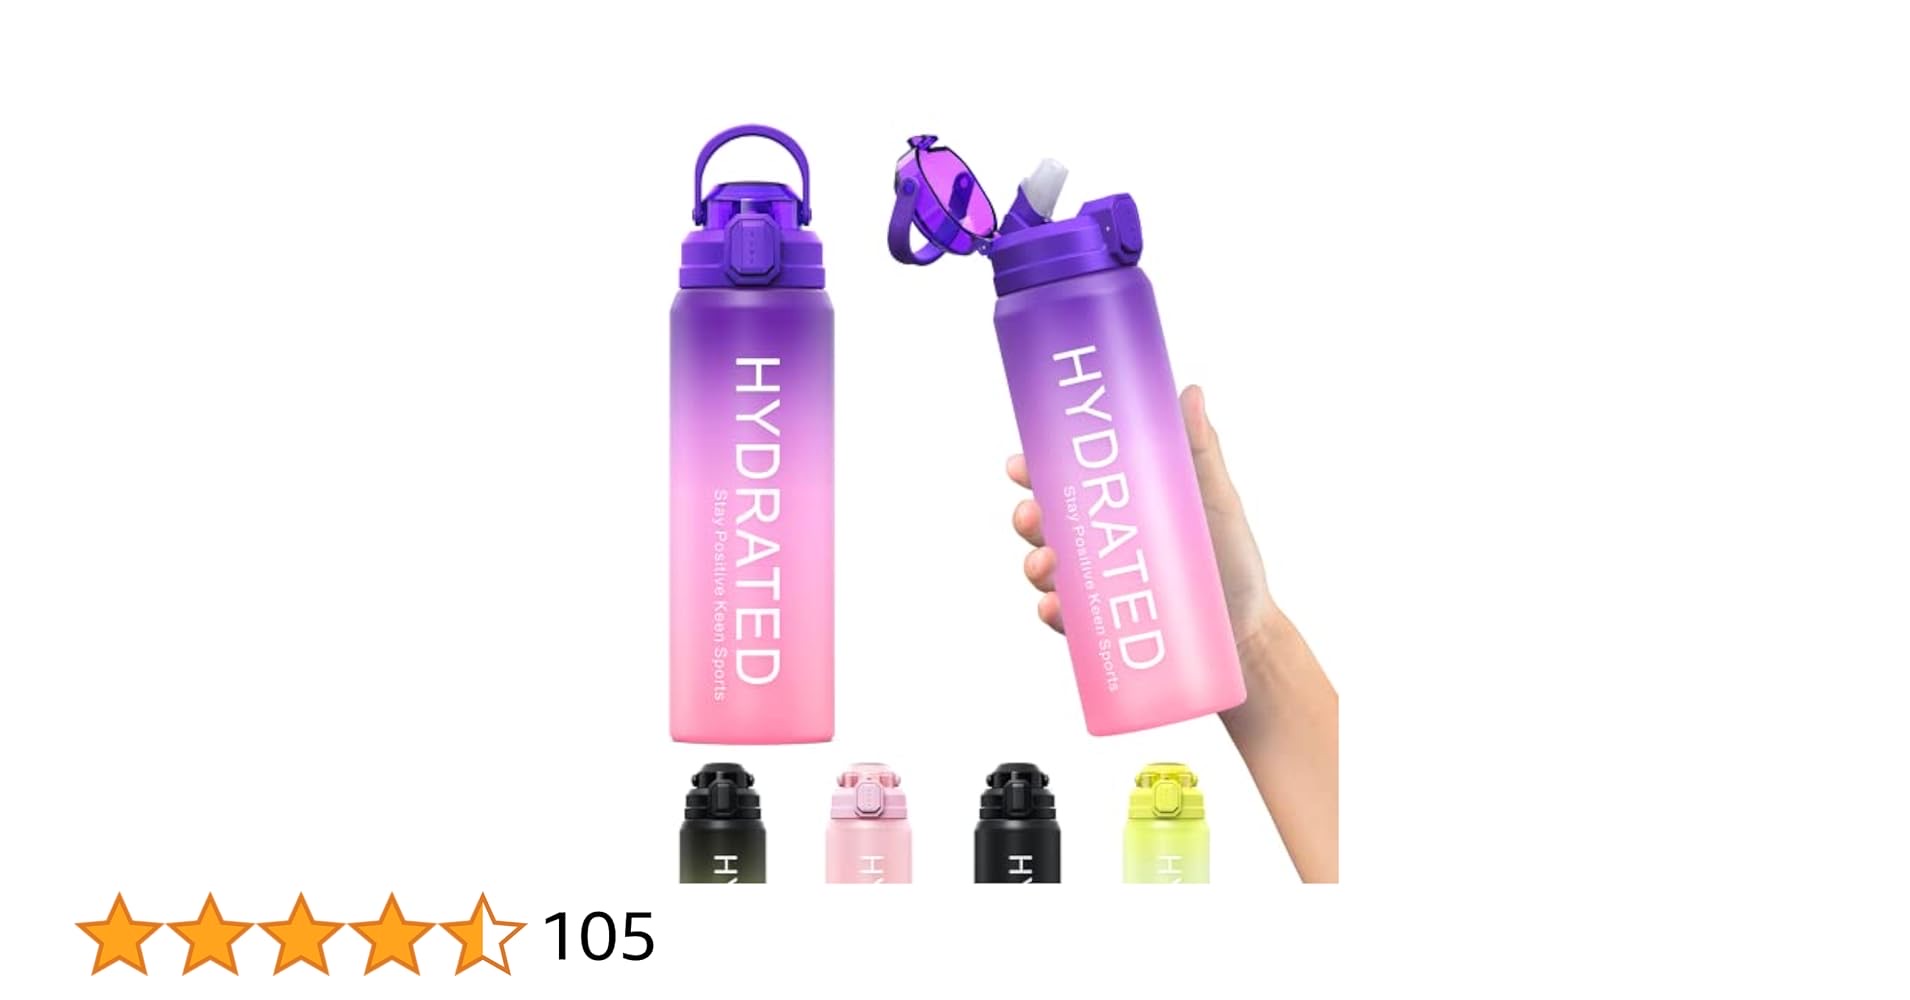 Y&3 32oz Water Bottle with Straw & Time Marker, Motivational Water Bottle with Handle, Leakproof, Tritan BPA Free Water Jug, for Fitness, Gym, Outdoor (Purple Pink Gradient)